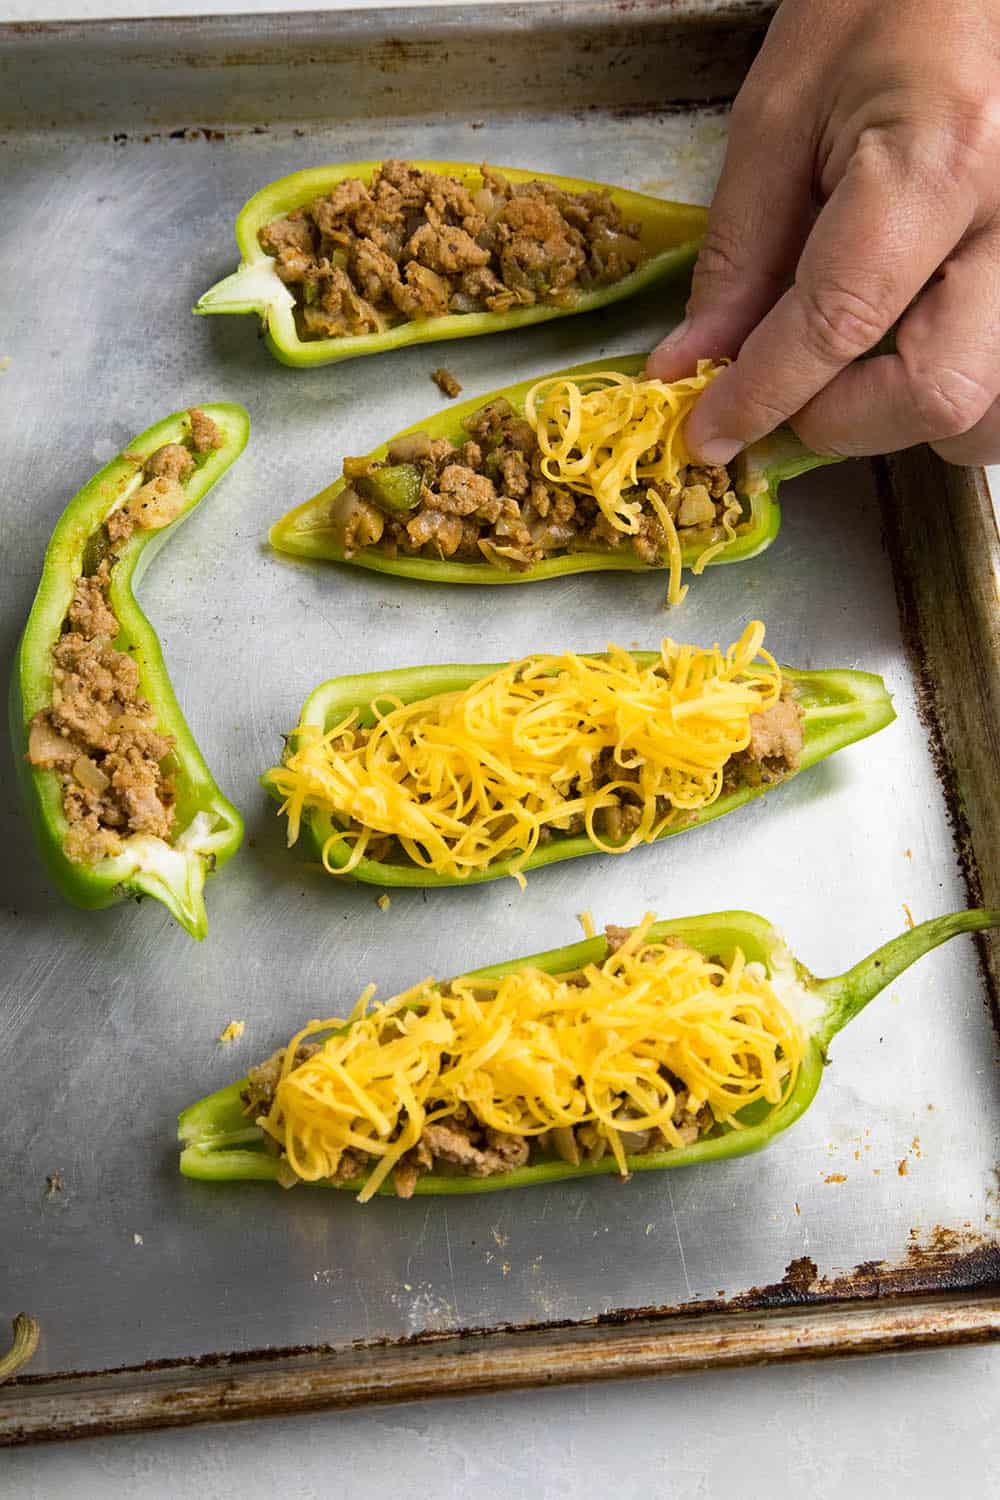 Topping the stuffed Anaheim peppers with cheese